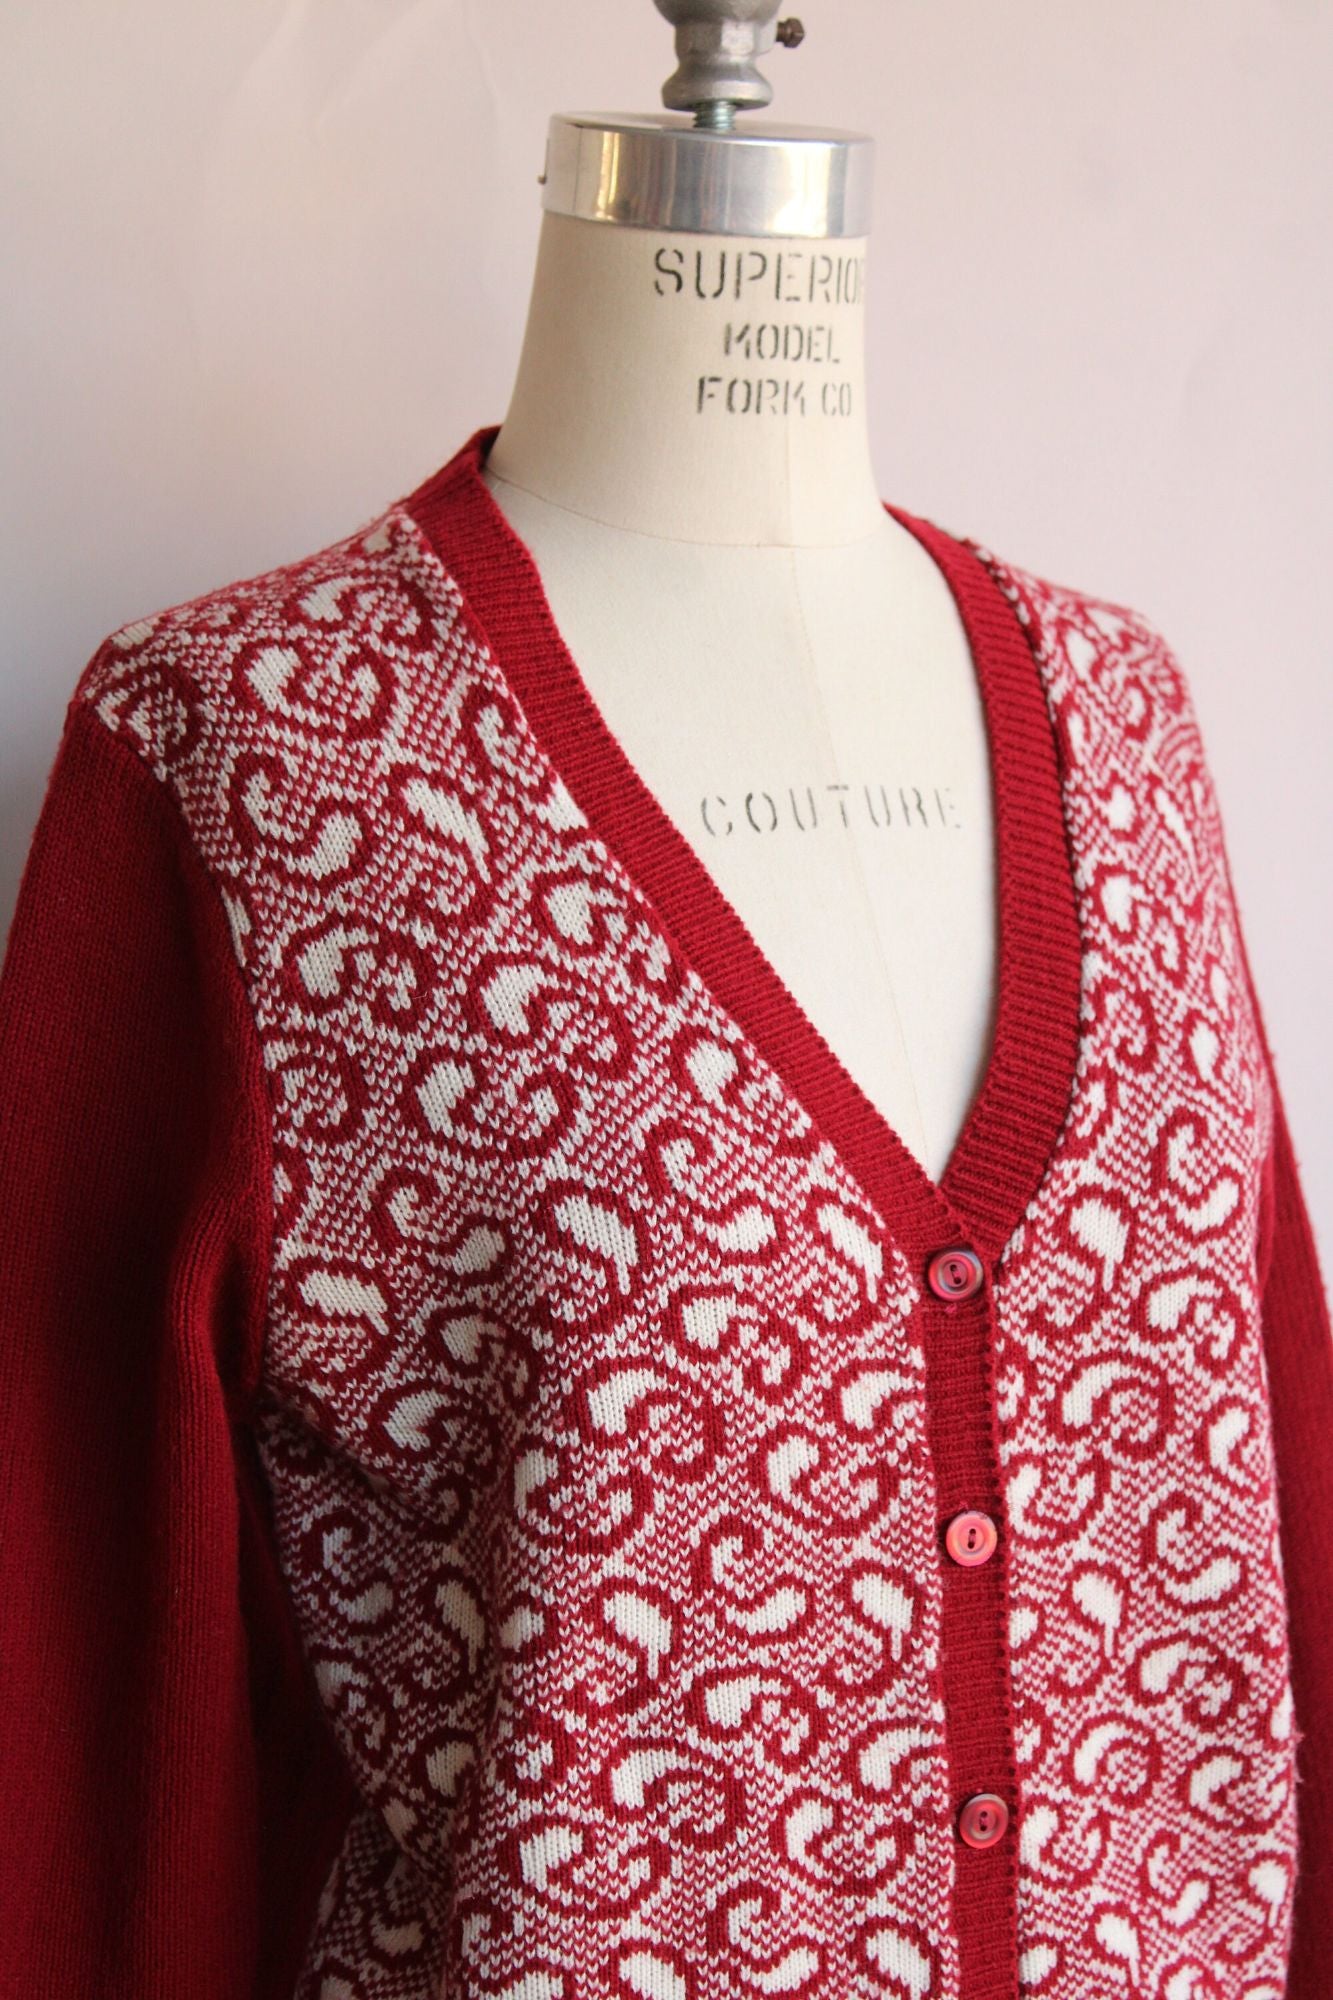 Vintage 1970s Cardigan Sweater in Red and White Paisley